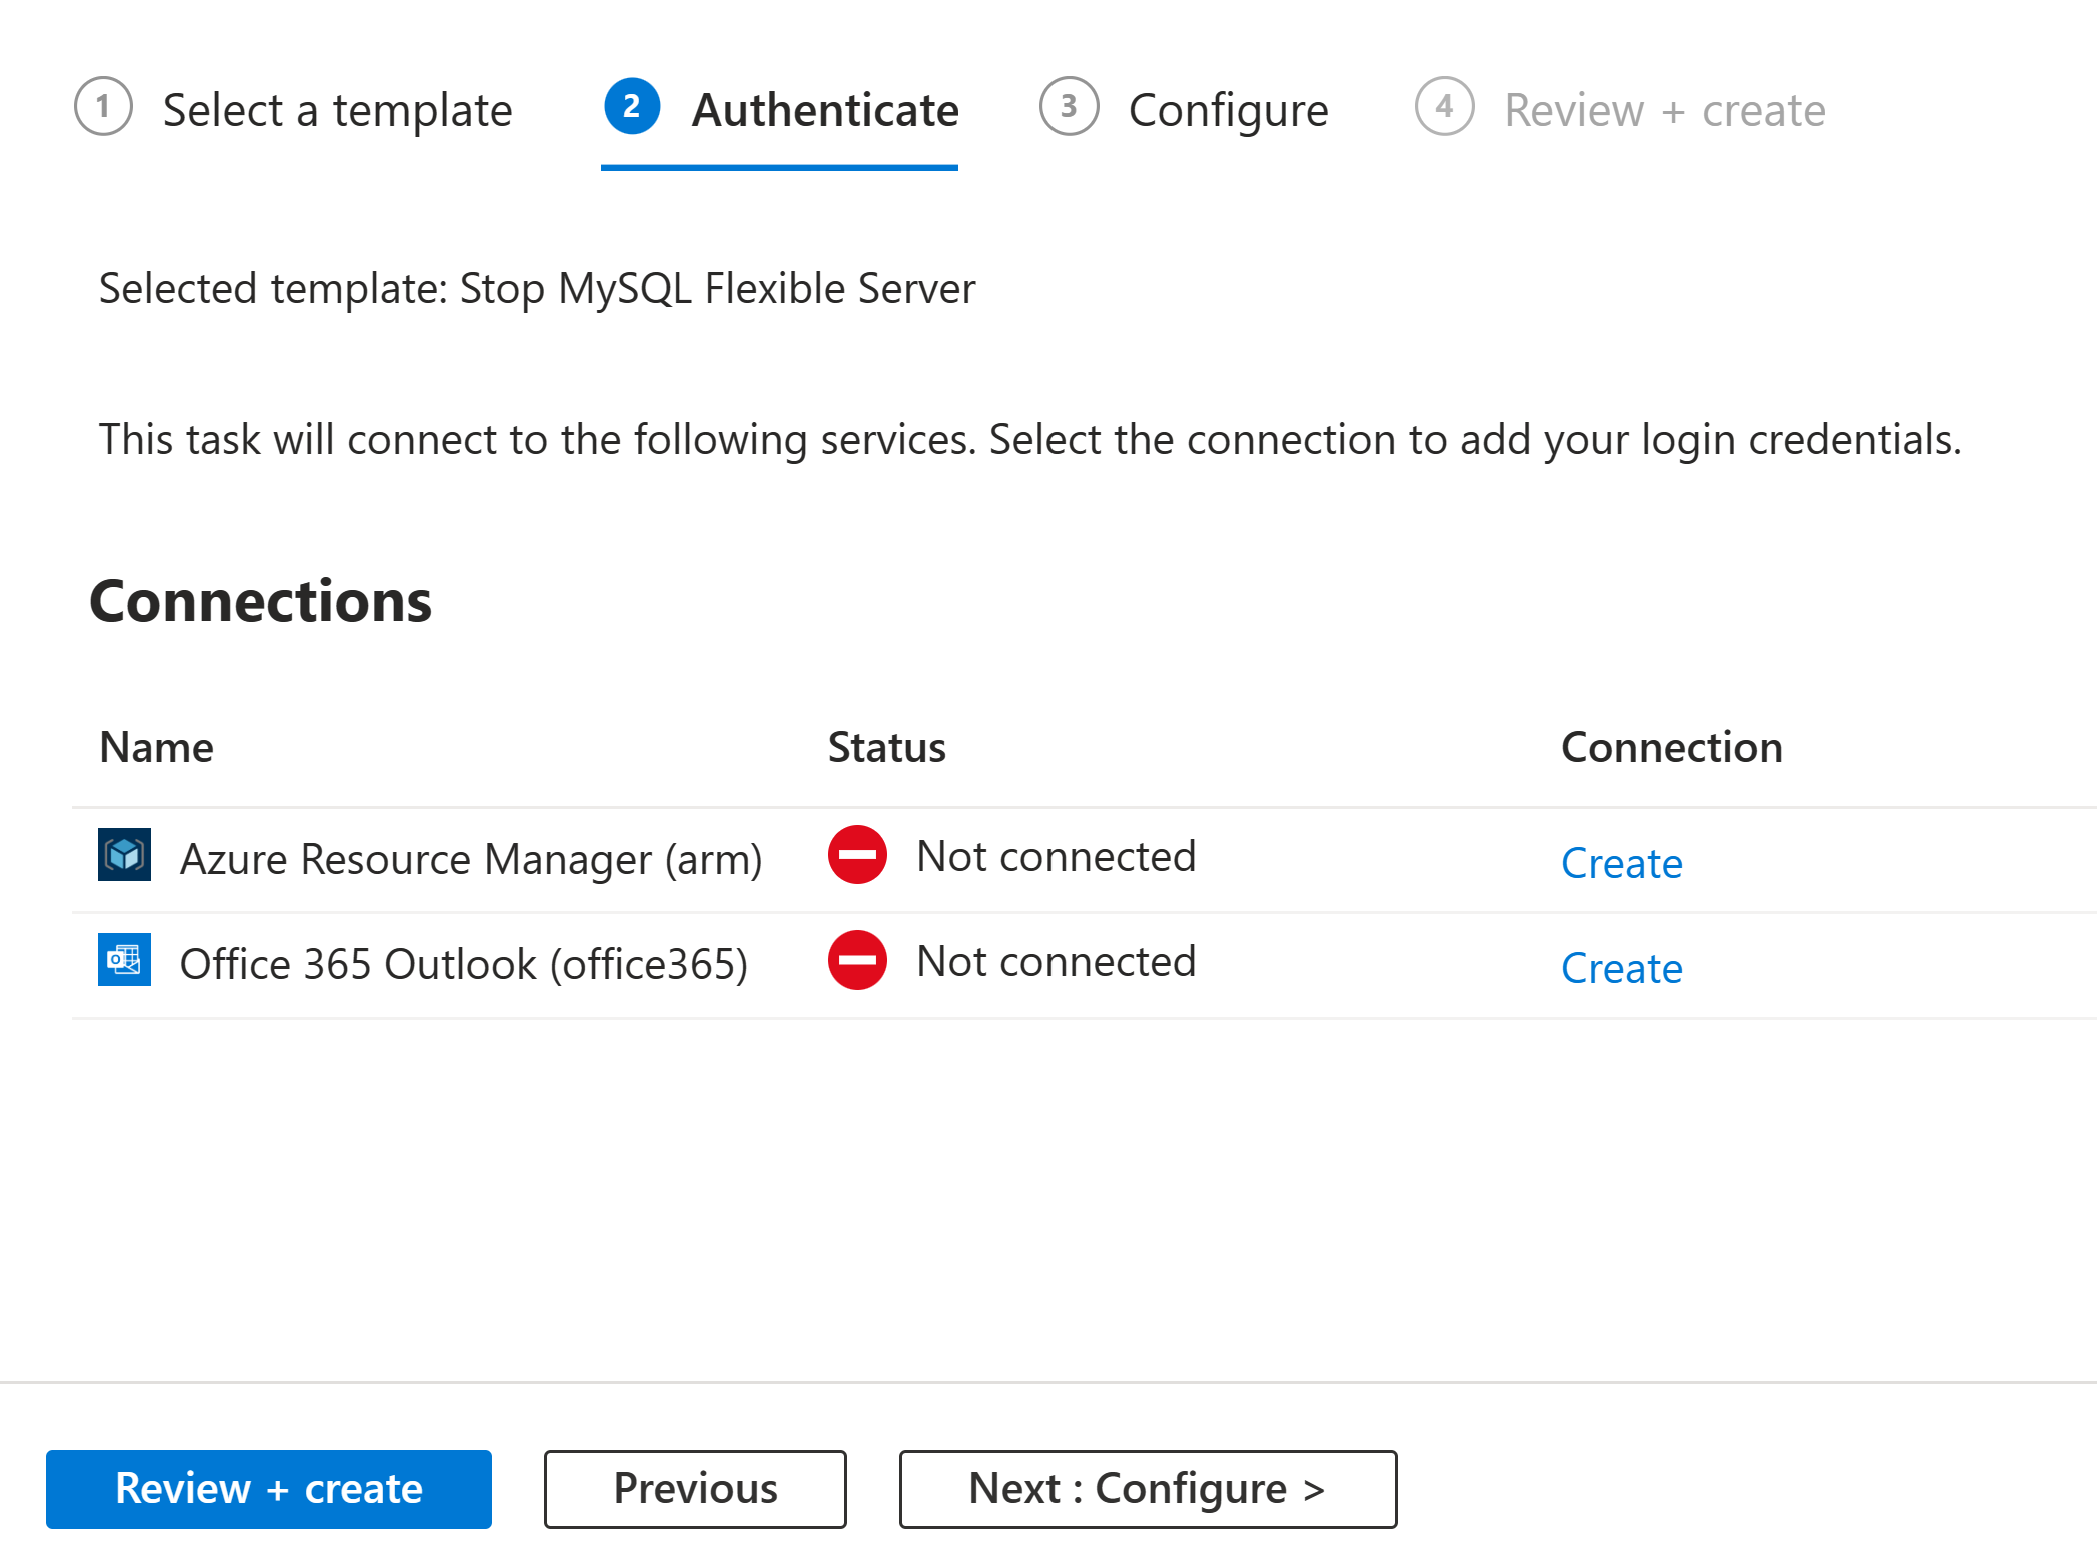 Screenshot that shows the selected "Create" option for the Azure Resource Manager connection.